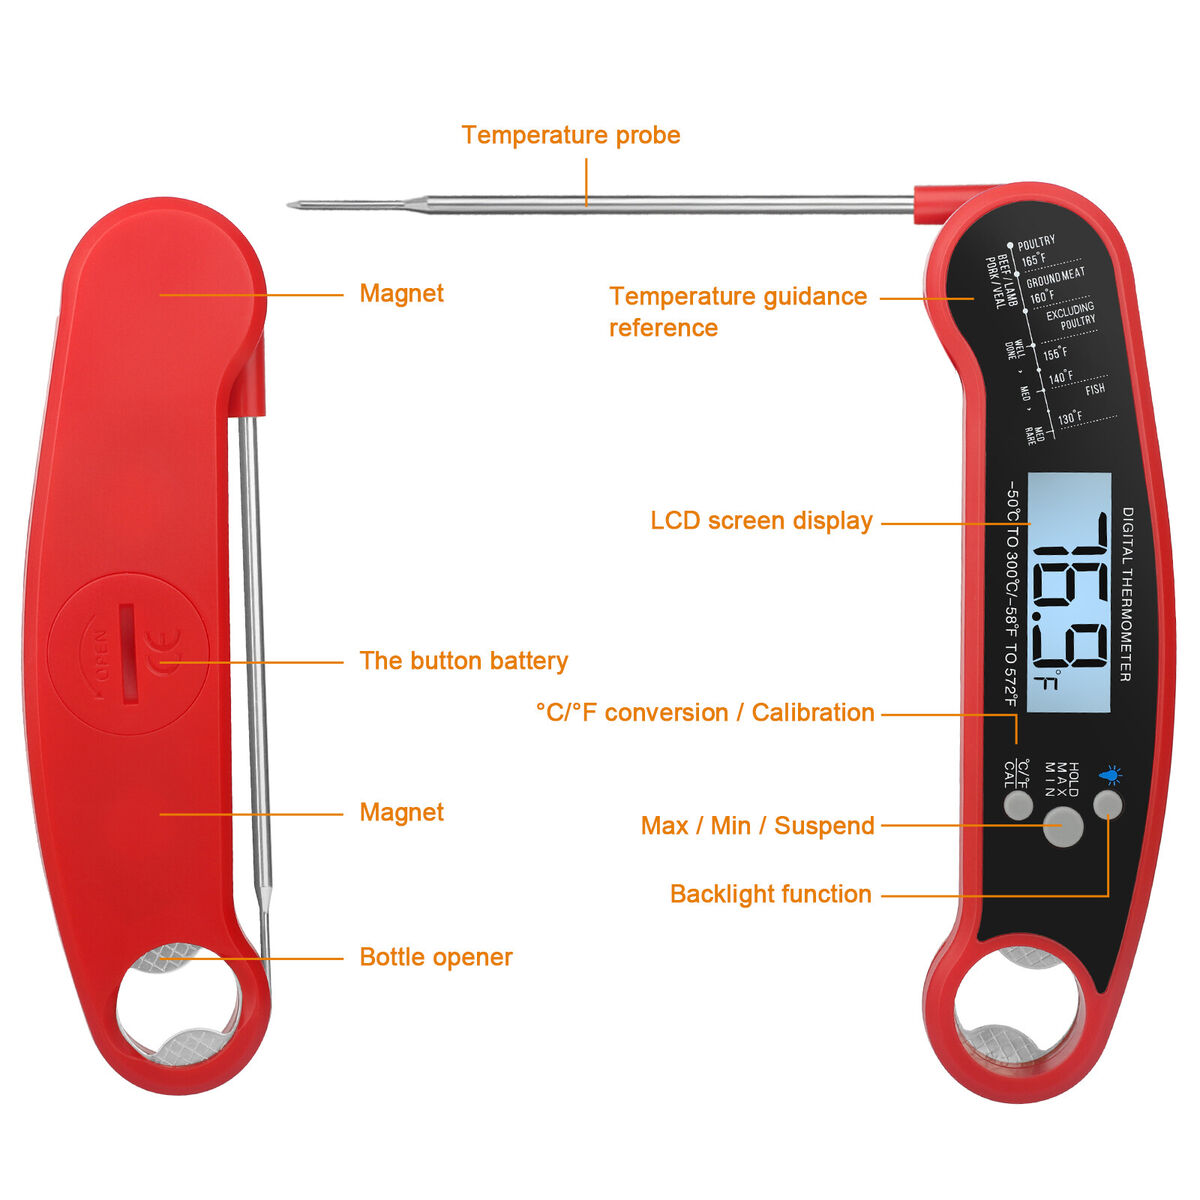 How to Calibrate a Digital Meat Thermometer Professionally